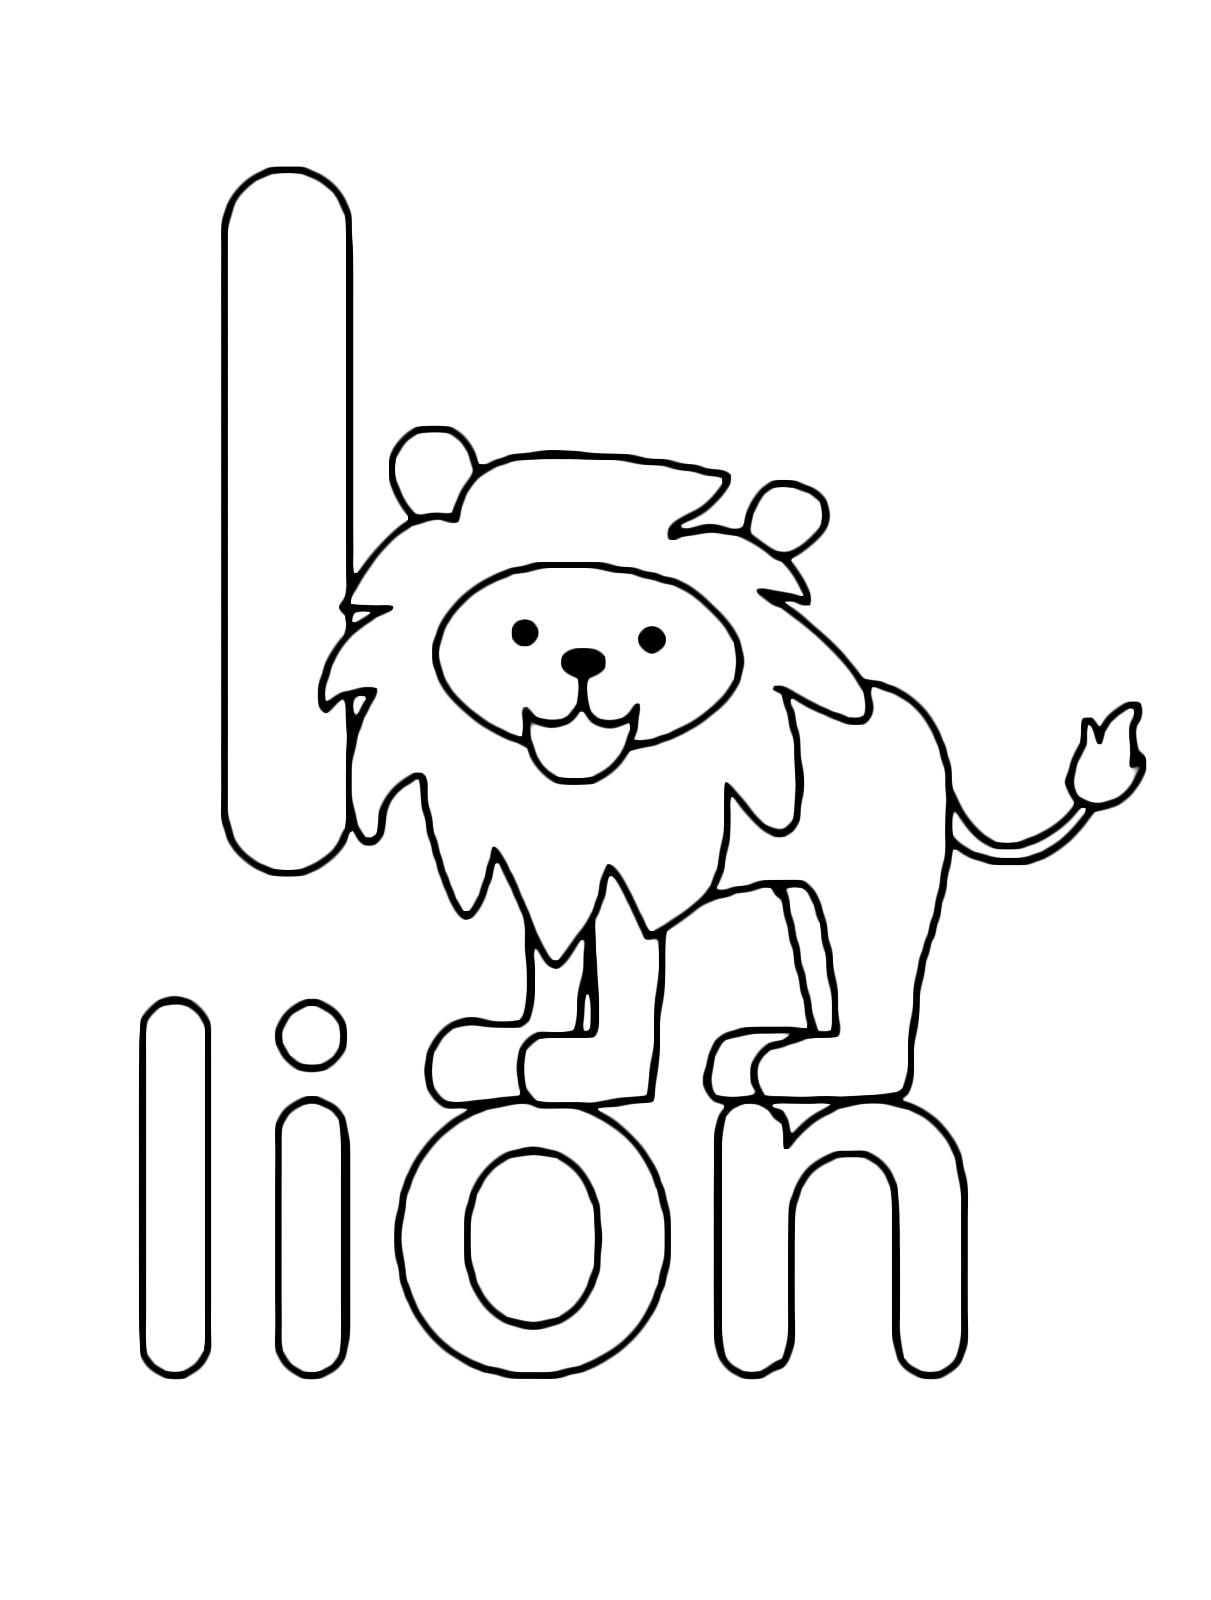 Letters and numbers - l for lion lowercase letter